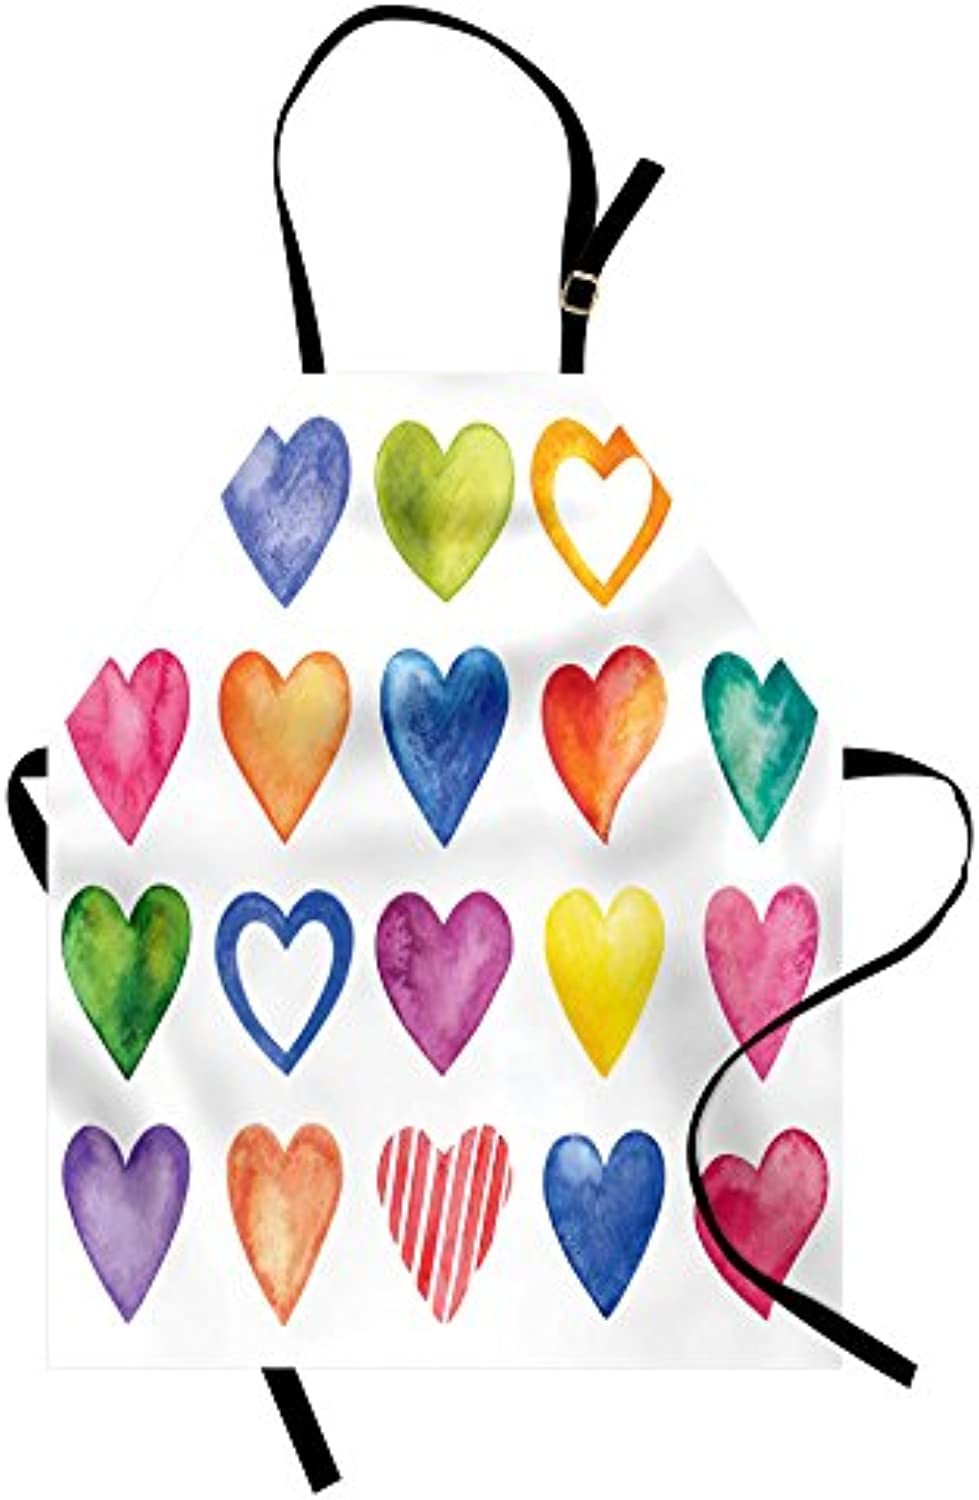 Granbey Grunge Apron  Rainbow Color Heart Shapes Valentine's Day Design Romantic His and Hers Theme  Unisex Kitchen Bib with Adjustable Neck for Cooking Gardening  Adult Size  Black and White